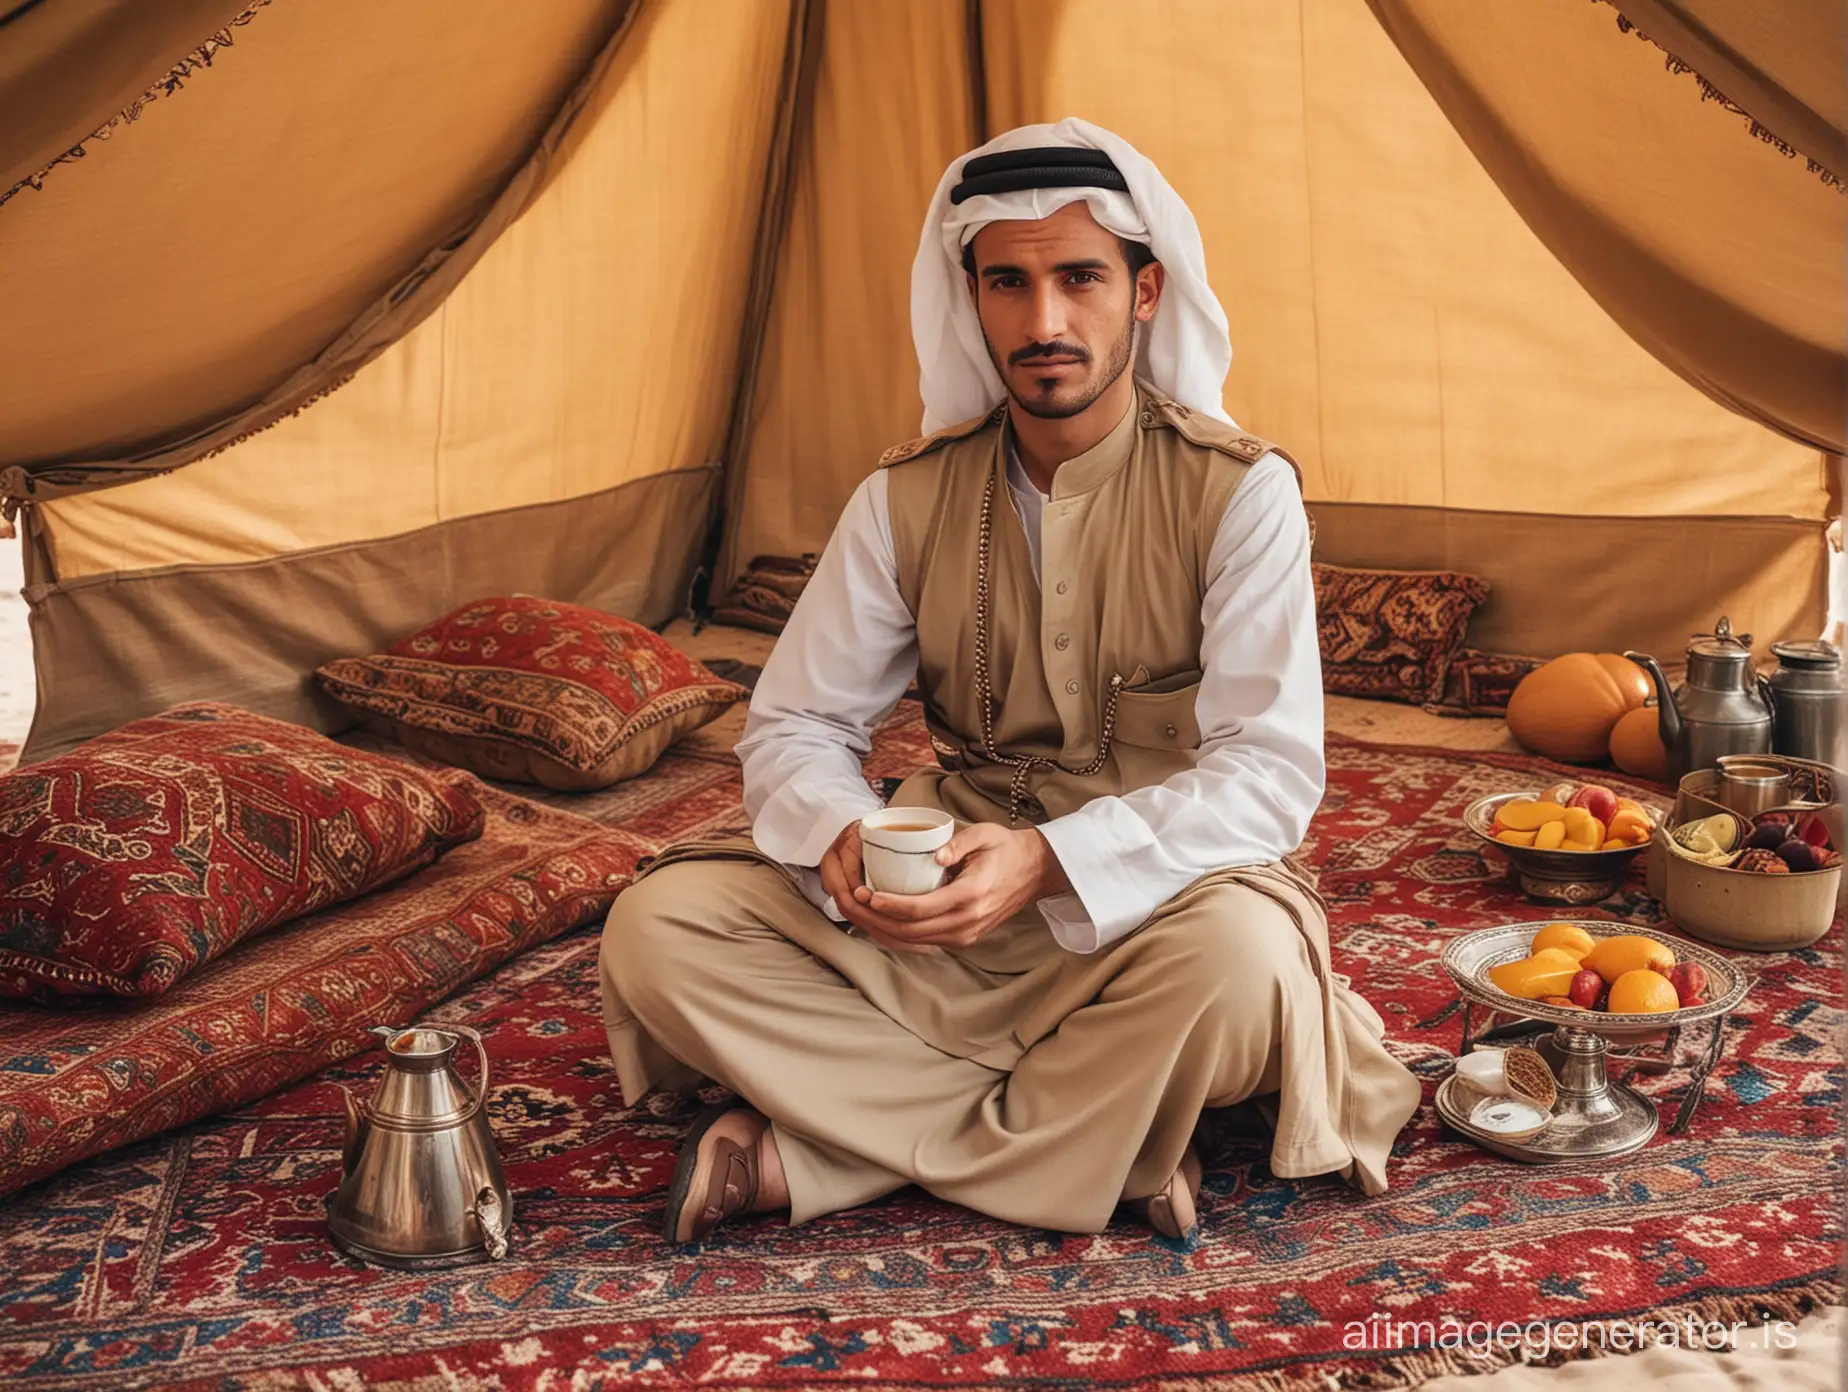 in the desert, a European man, 30, clean-shaven, dressed in the uniform of an Arab sheikh, sits in a luxurious tent on a beautiful carpet, holding a cup of hot coffee in his hand and staring into the lens. Various fruits and gourmet food are laid out on the carpet. Outside the tent, a dusty off-road vehicle is parked next to the camel column